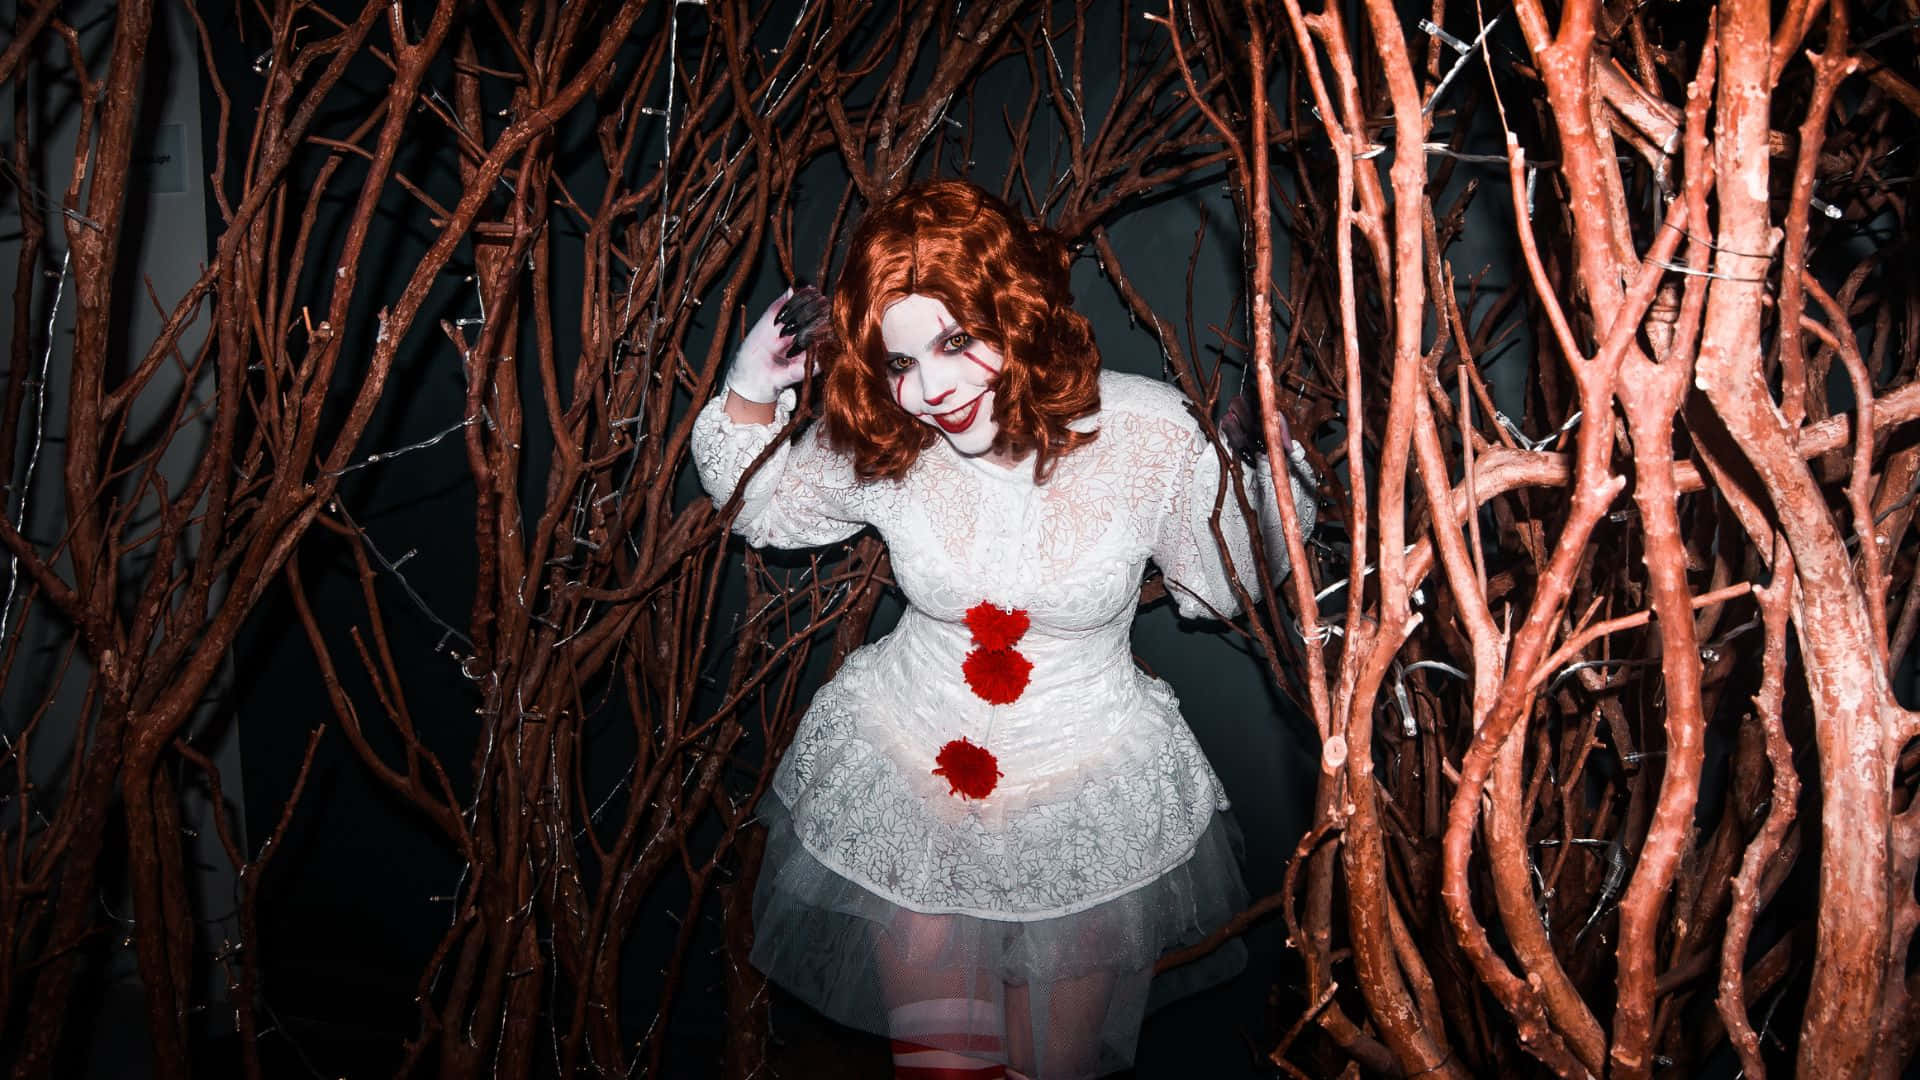 Express Your Darkest Nightmares With Spooky Horror Costumes" Wallpaper